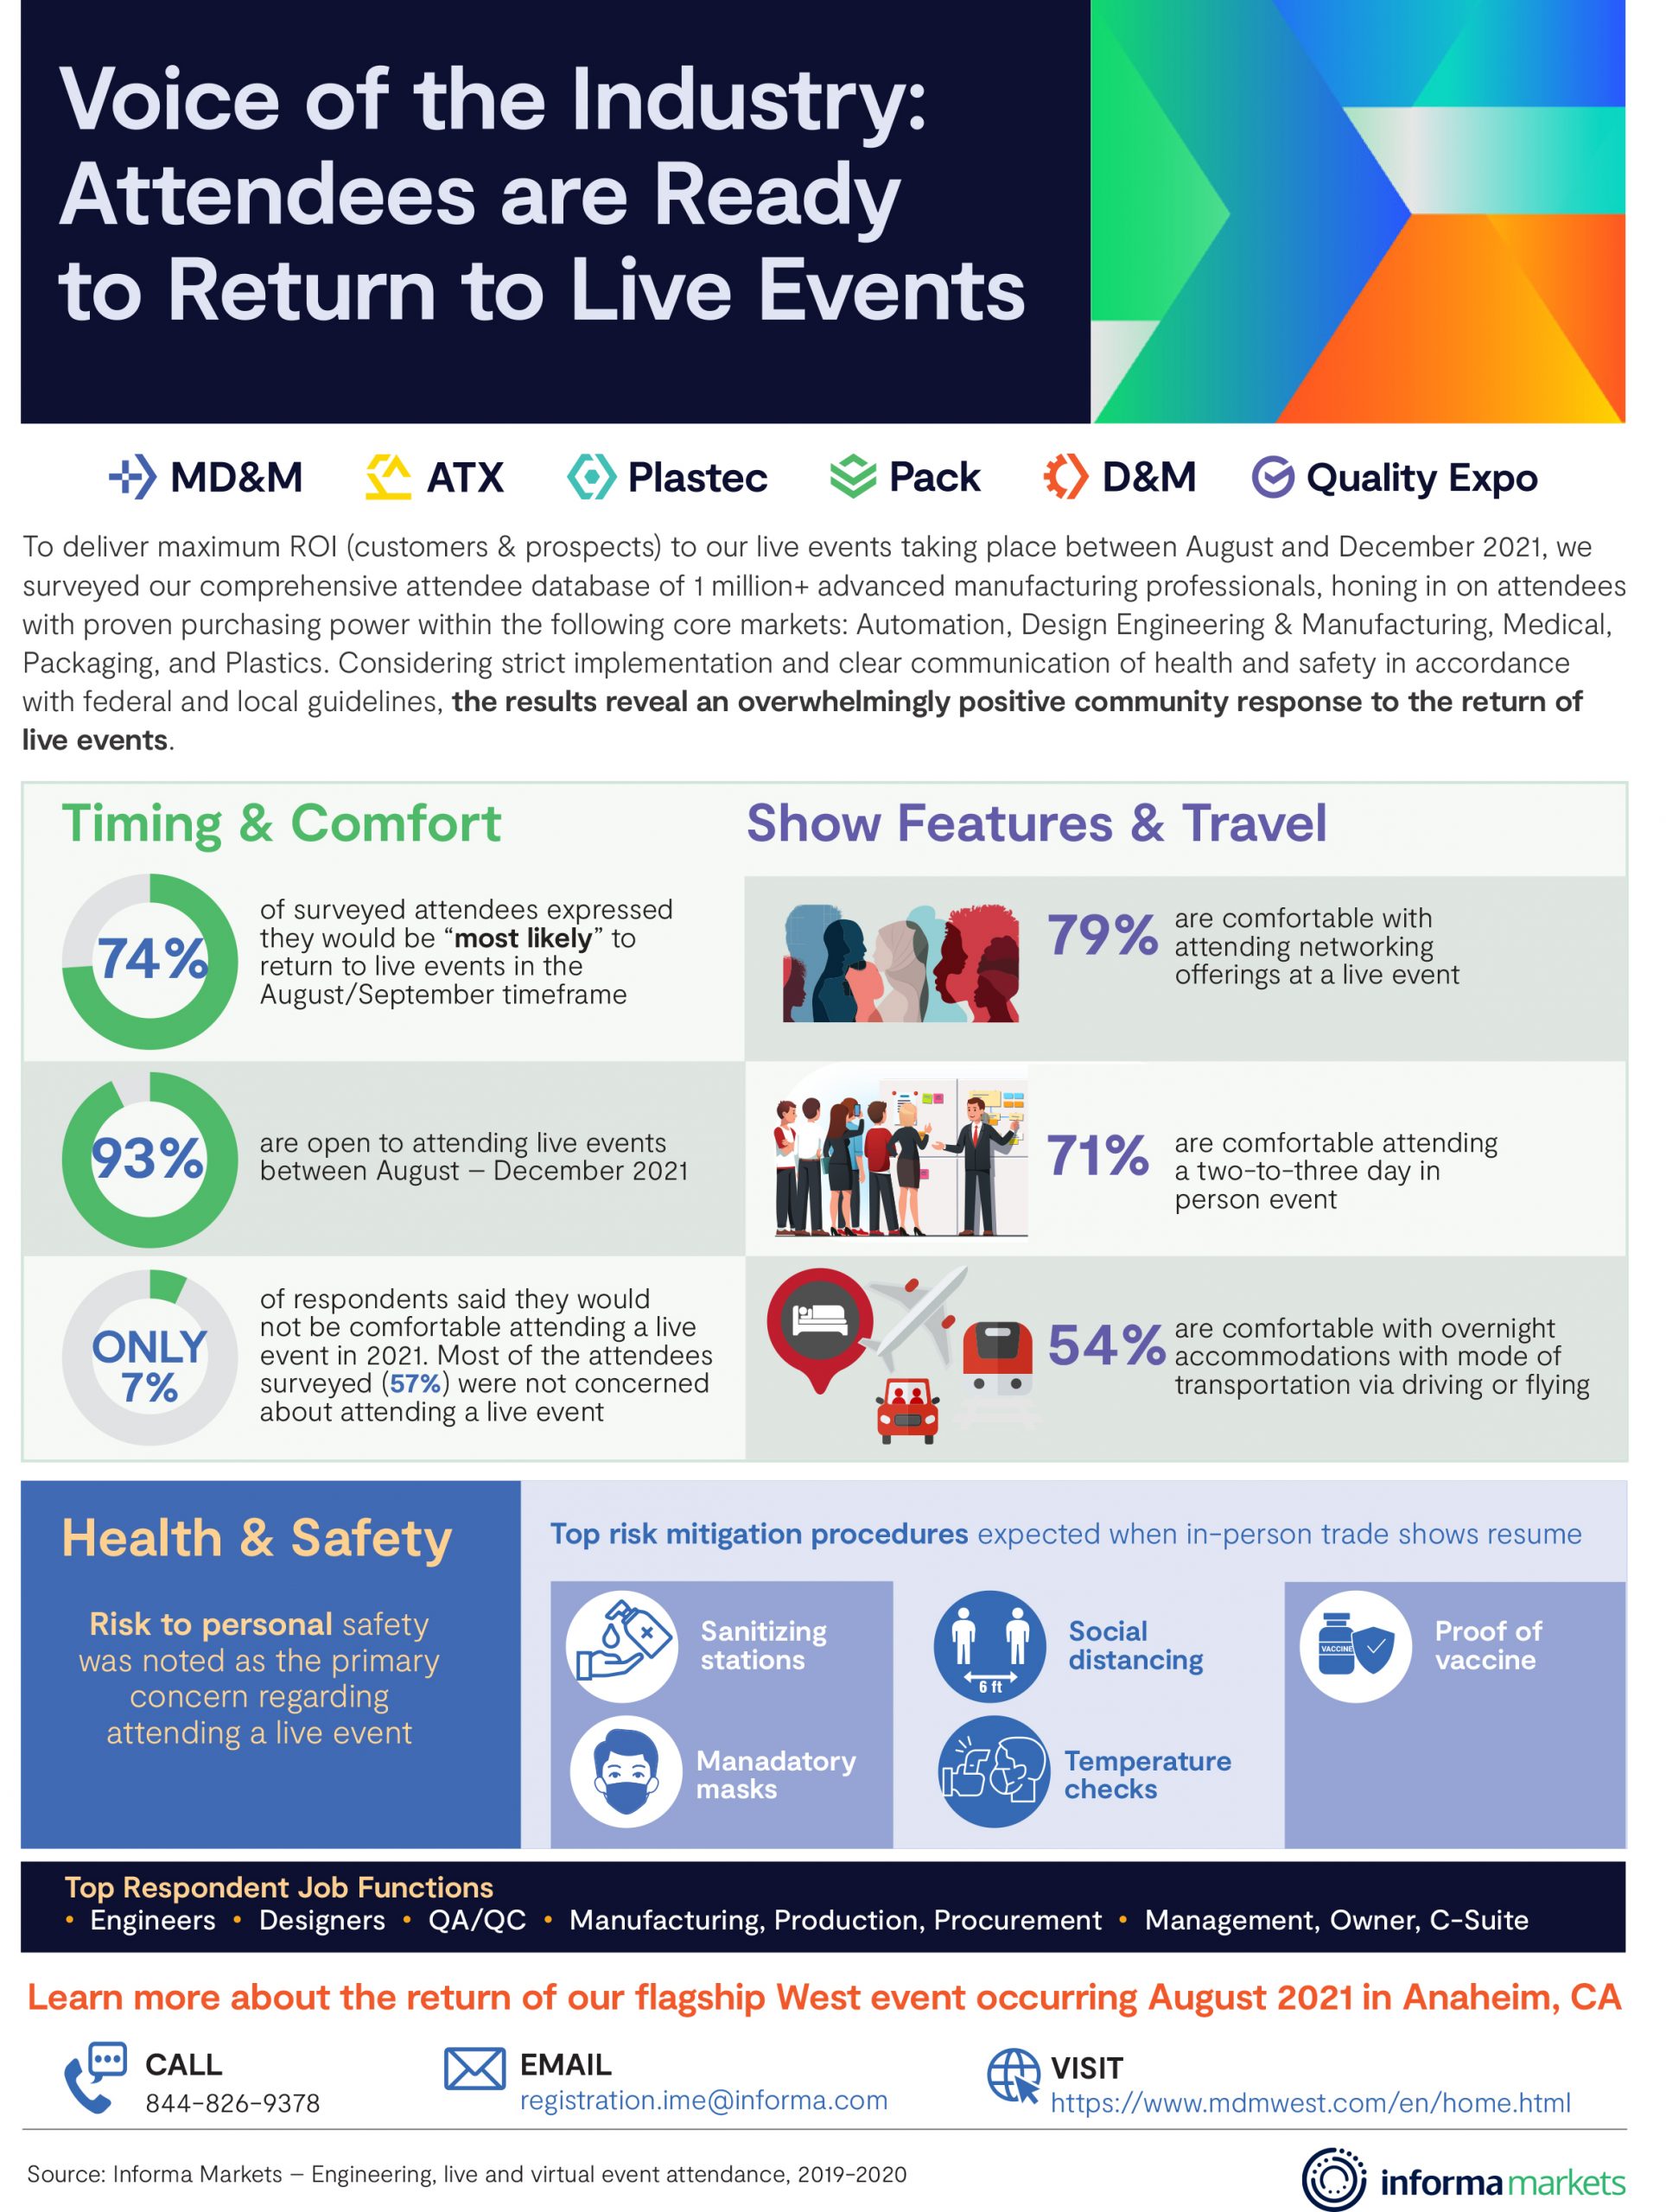 Attendees are Ready to Return to Live Events Industry Today Leader